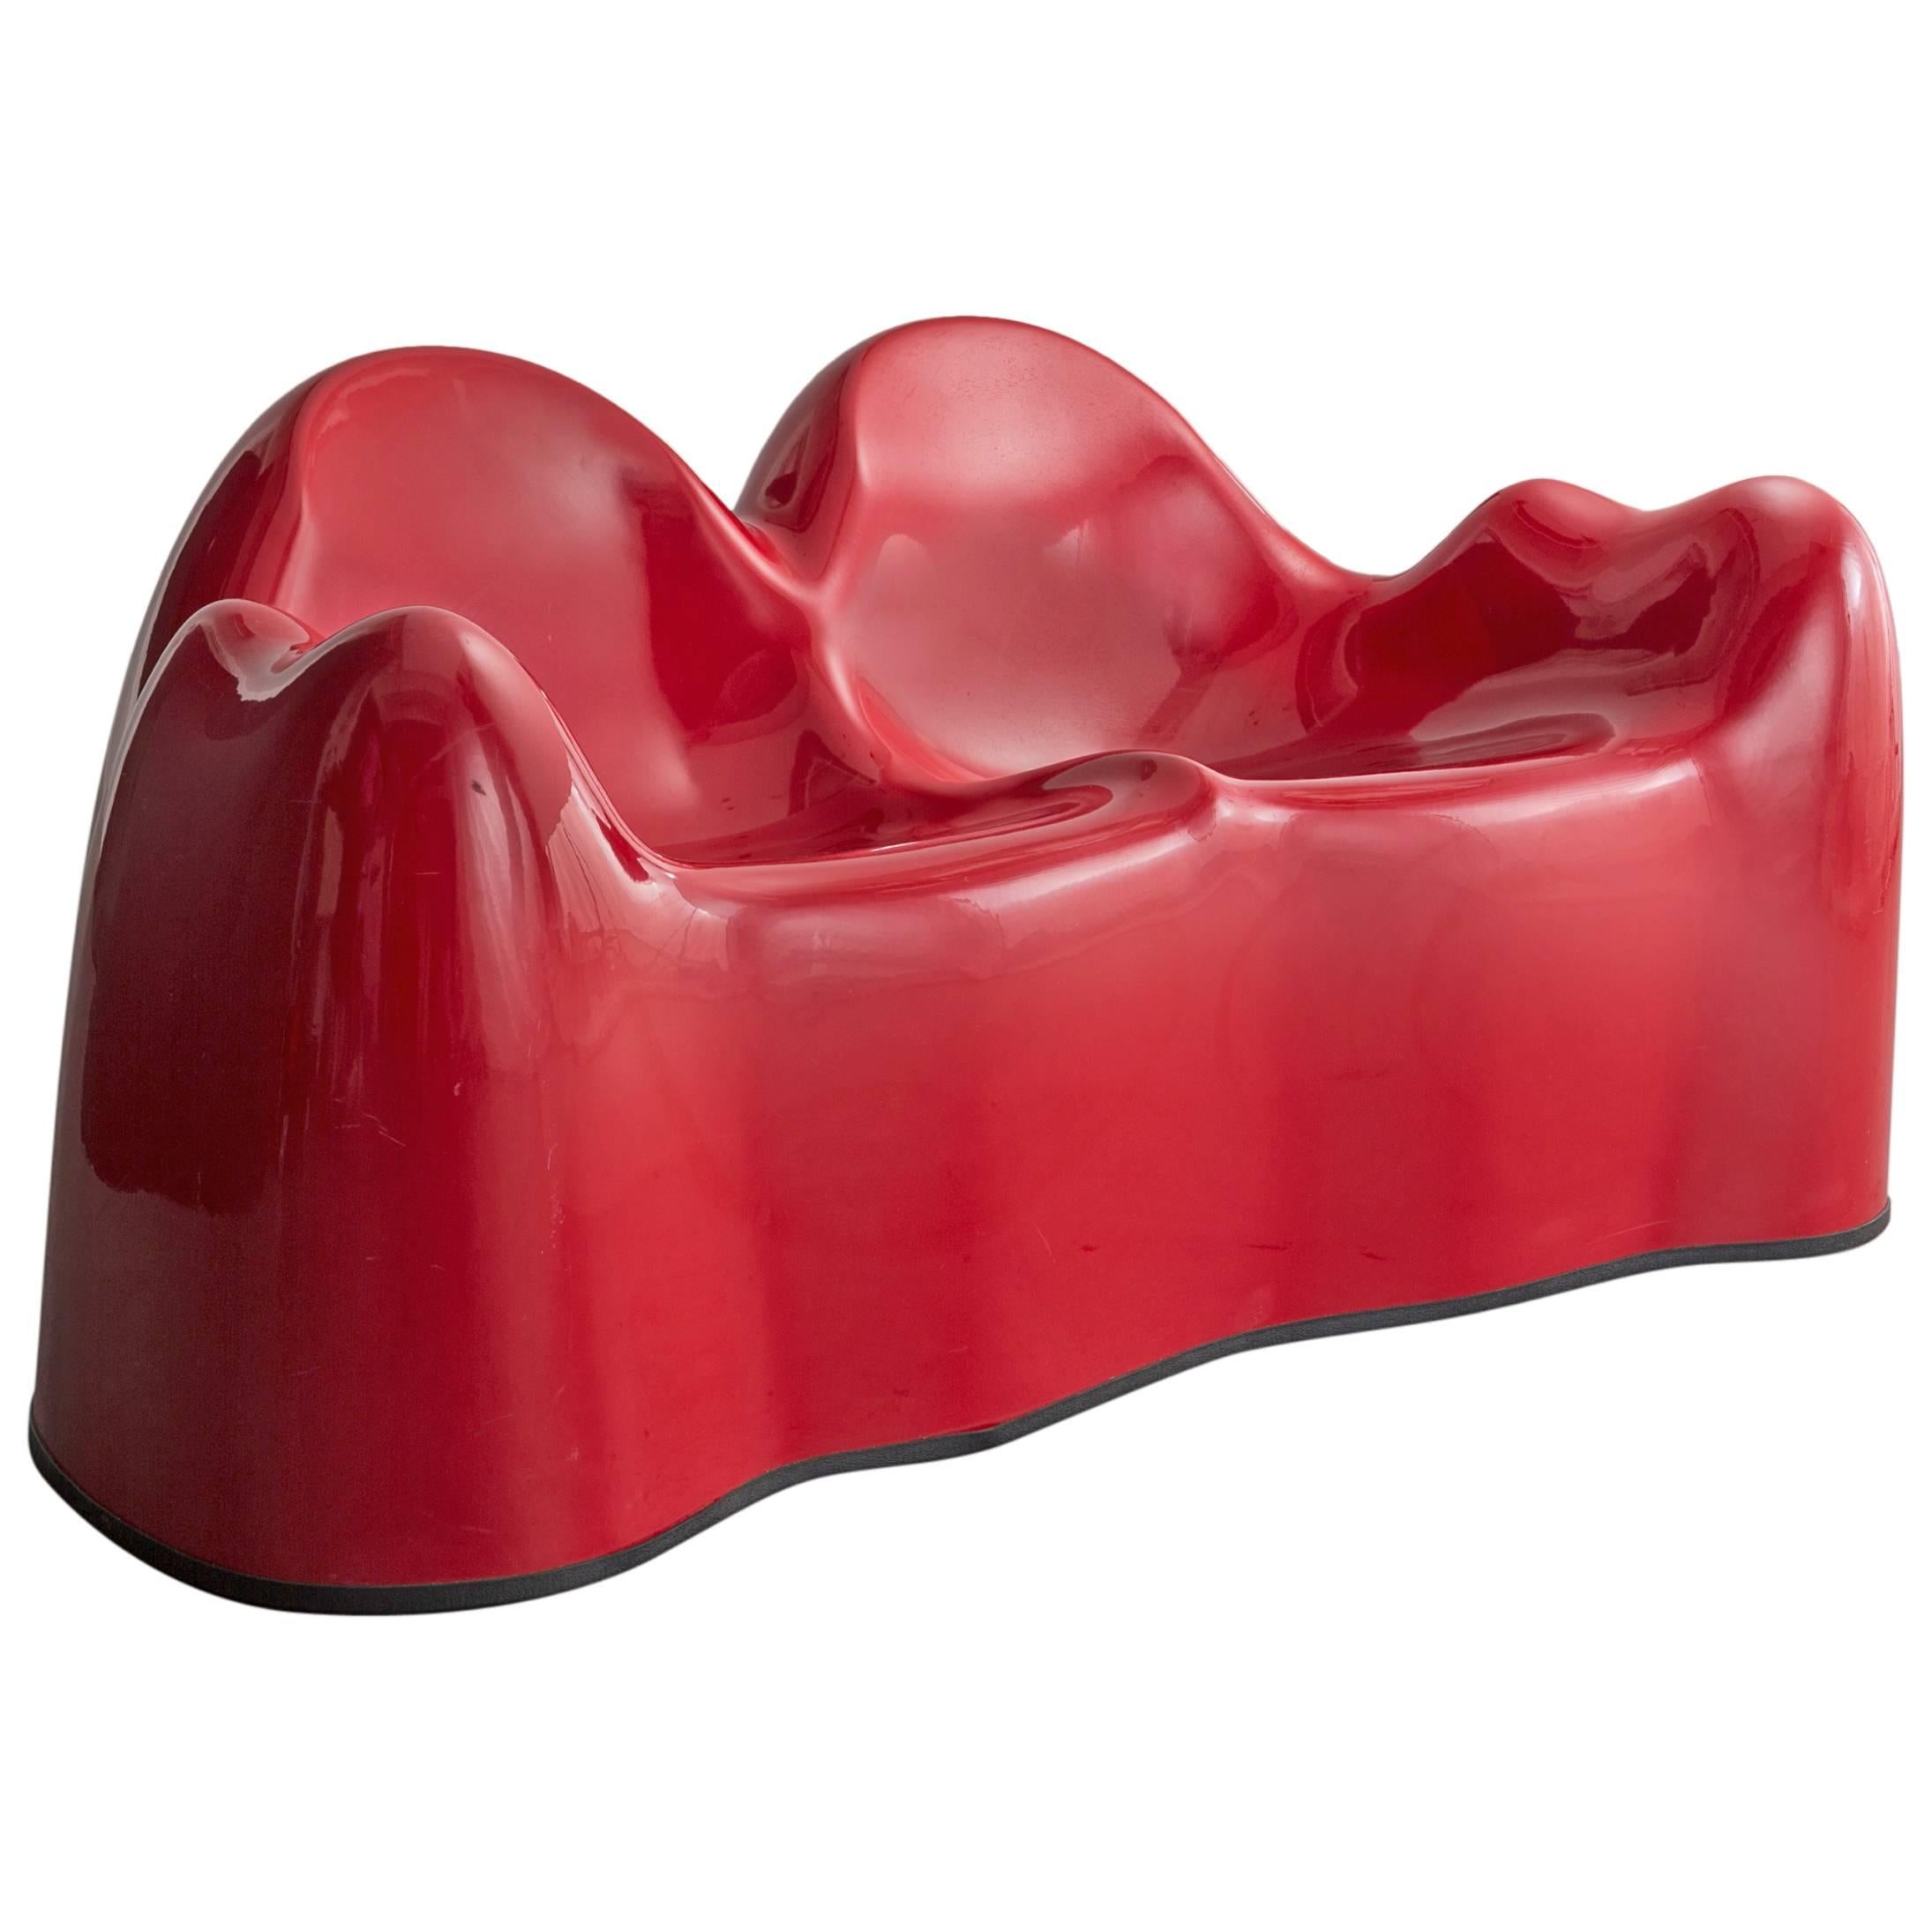 "Molar Group" Settee by Wendell Castle, USA, circa 1969